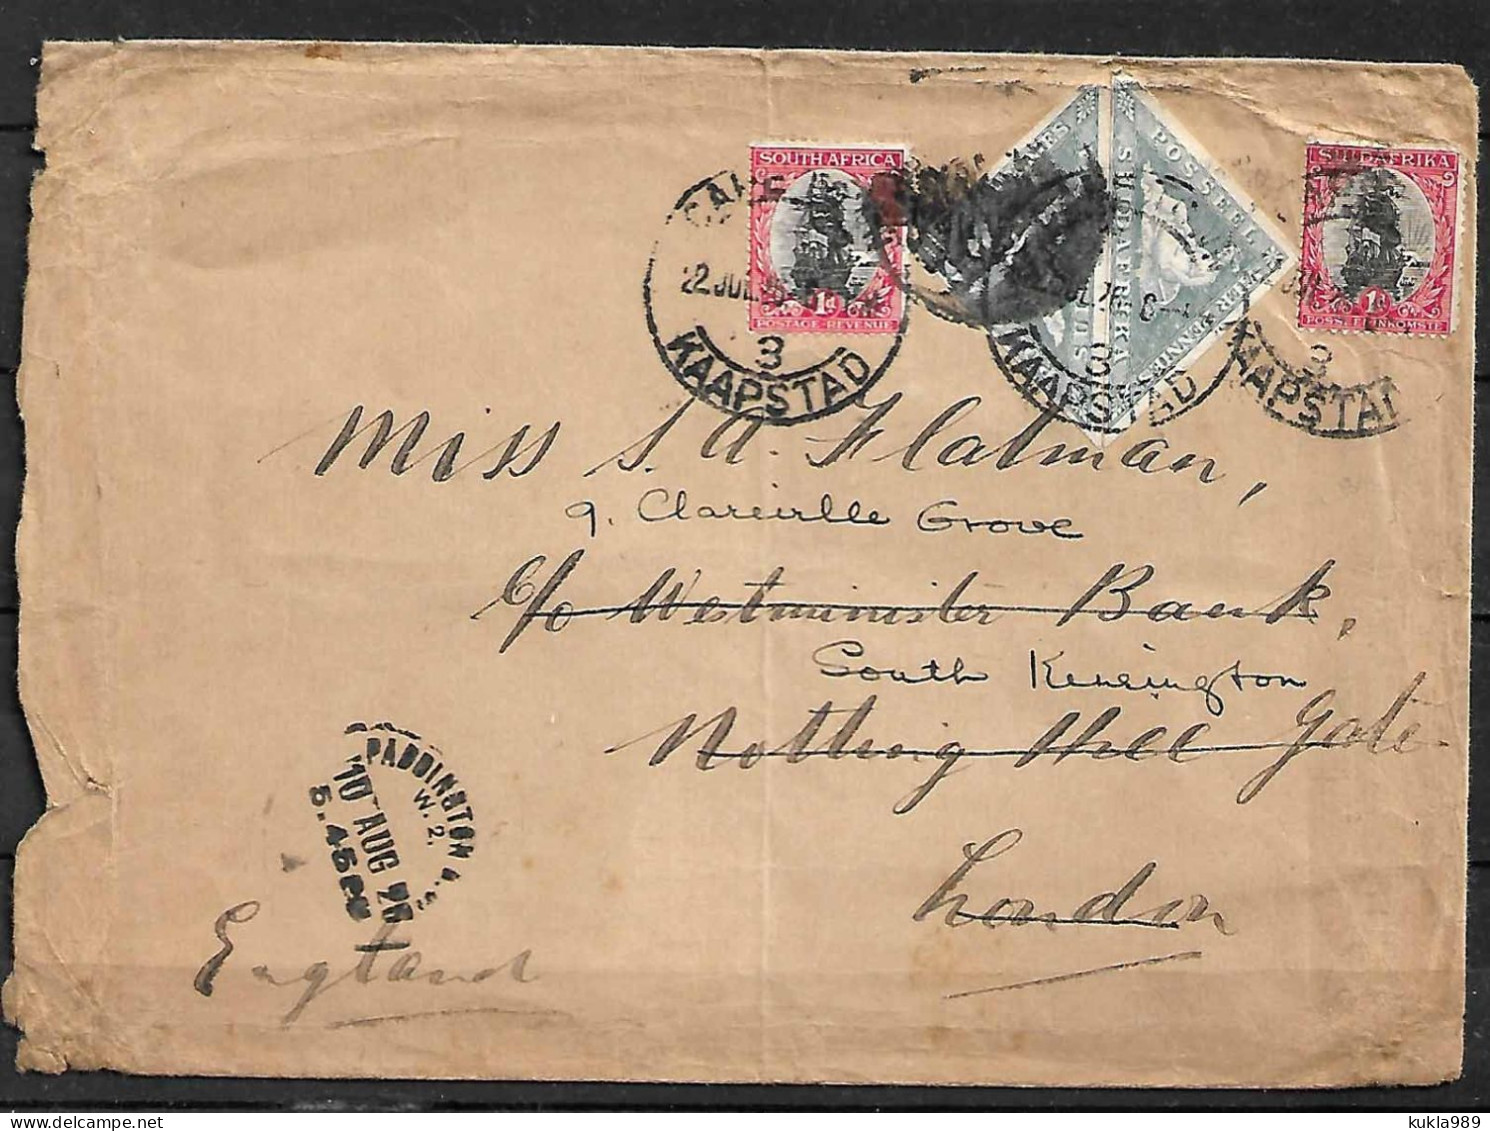 SOUTH AFRICA STAMPS 1926. COVER TO ENGLAND LONDON - Covers & Documents